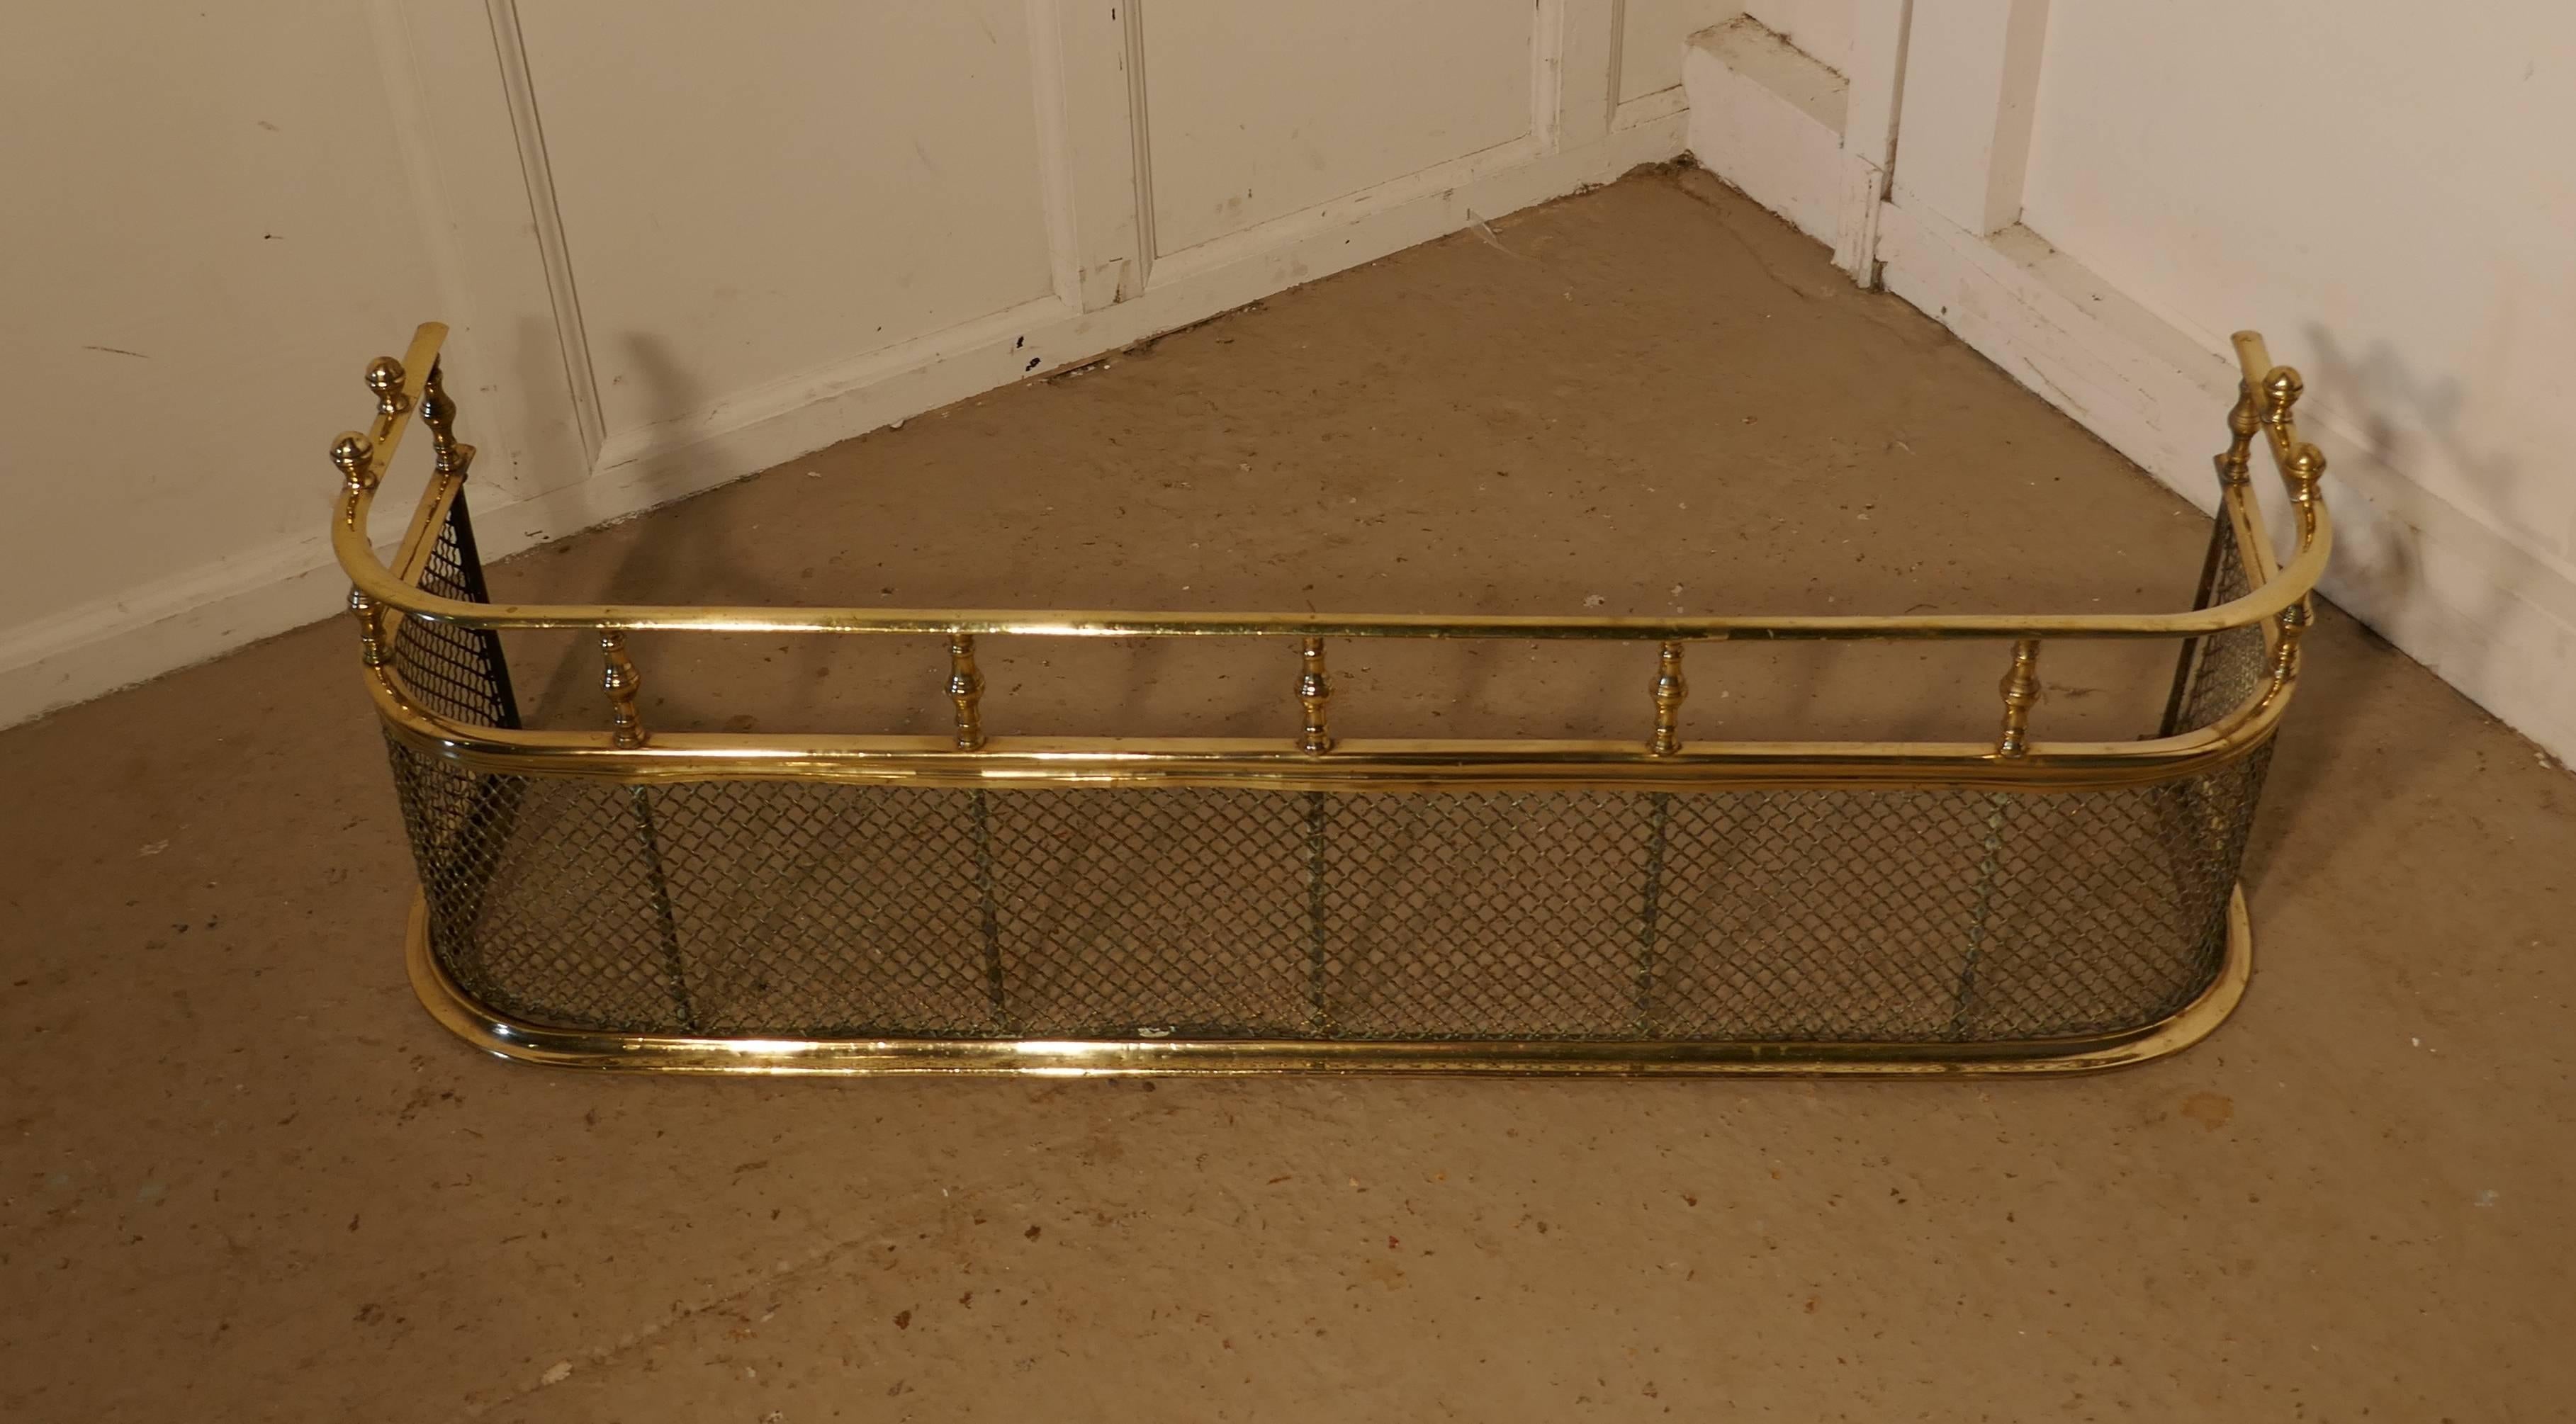 This is an Georgian antique Fender often known as a nursery guard as it completely surrounds the fire.
This Fender is top quality and very heavy it is made in solid brass, even the mesh around the fender is in brass, it has a double rail separated